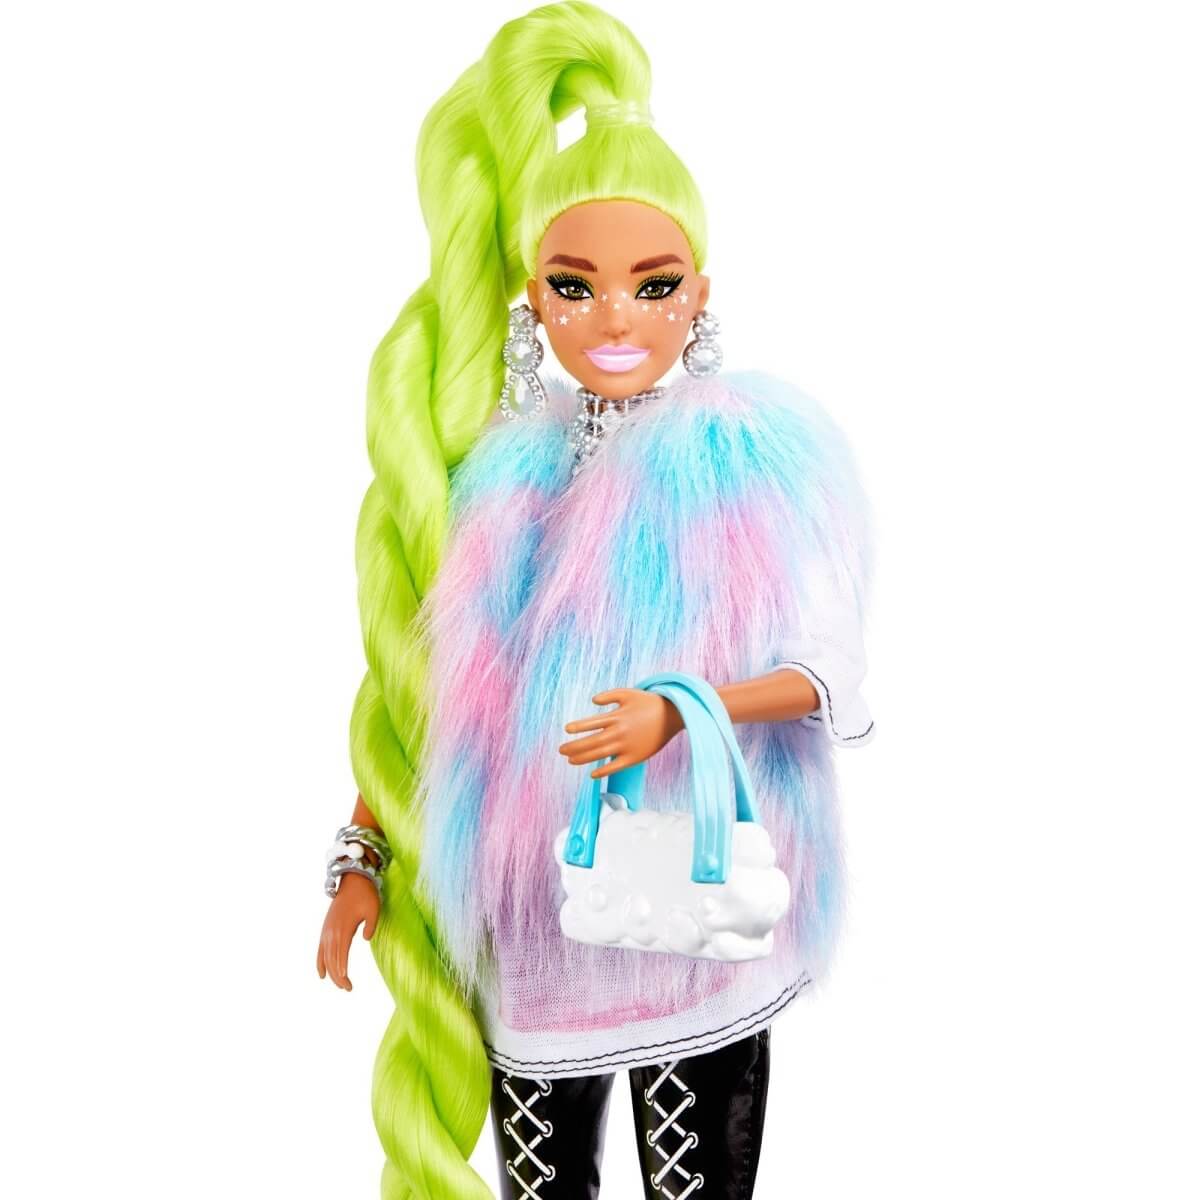 Barbie Extra Pet & Fashion Pack with Pet Fox, Fashion Pieces & Accessories (Exclusive) - Simon's Collectibles